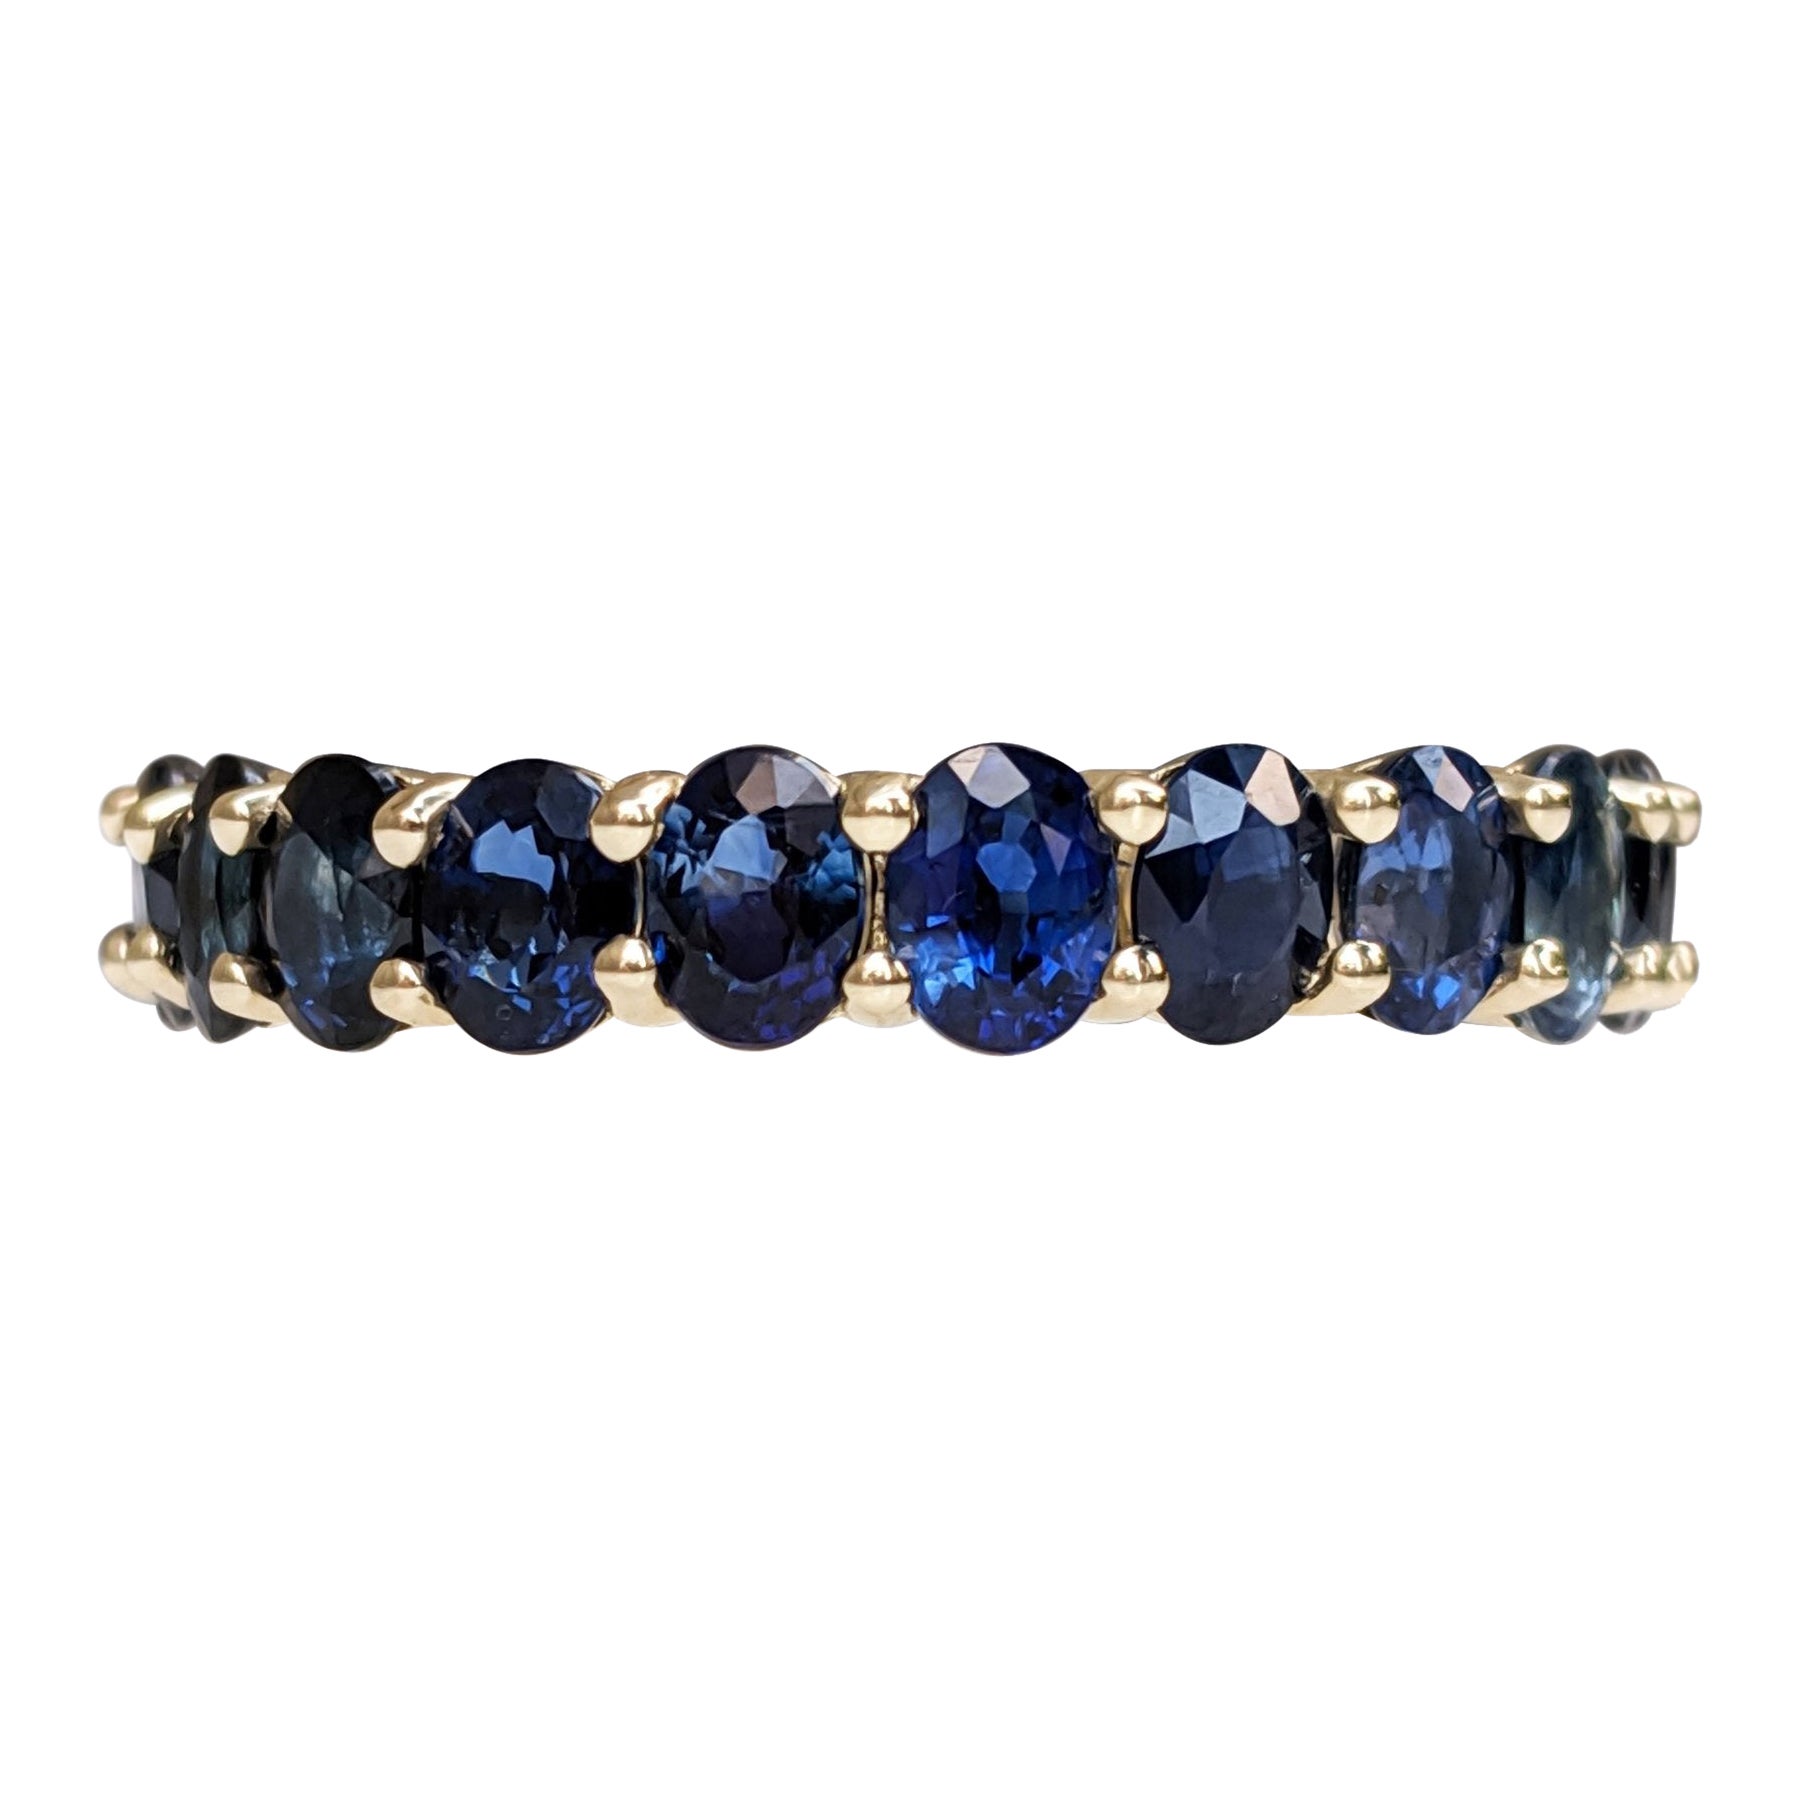 NO RESERVE! 5.22Ct Sapphire Eternity Band - Sapphire - 14kt Yellow gold - Ring For Sale